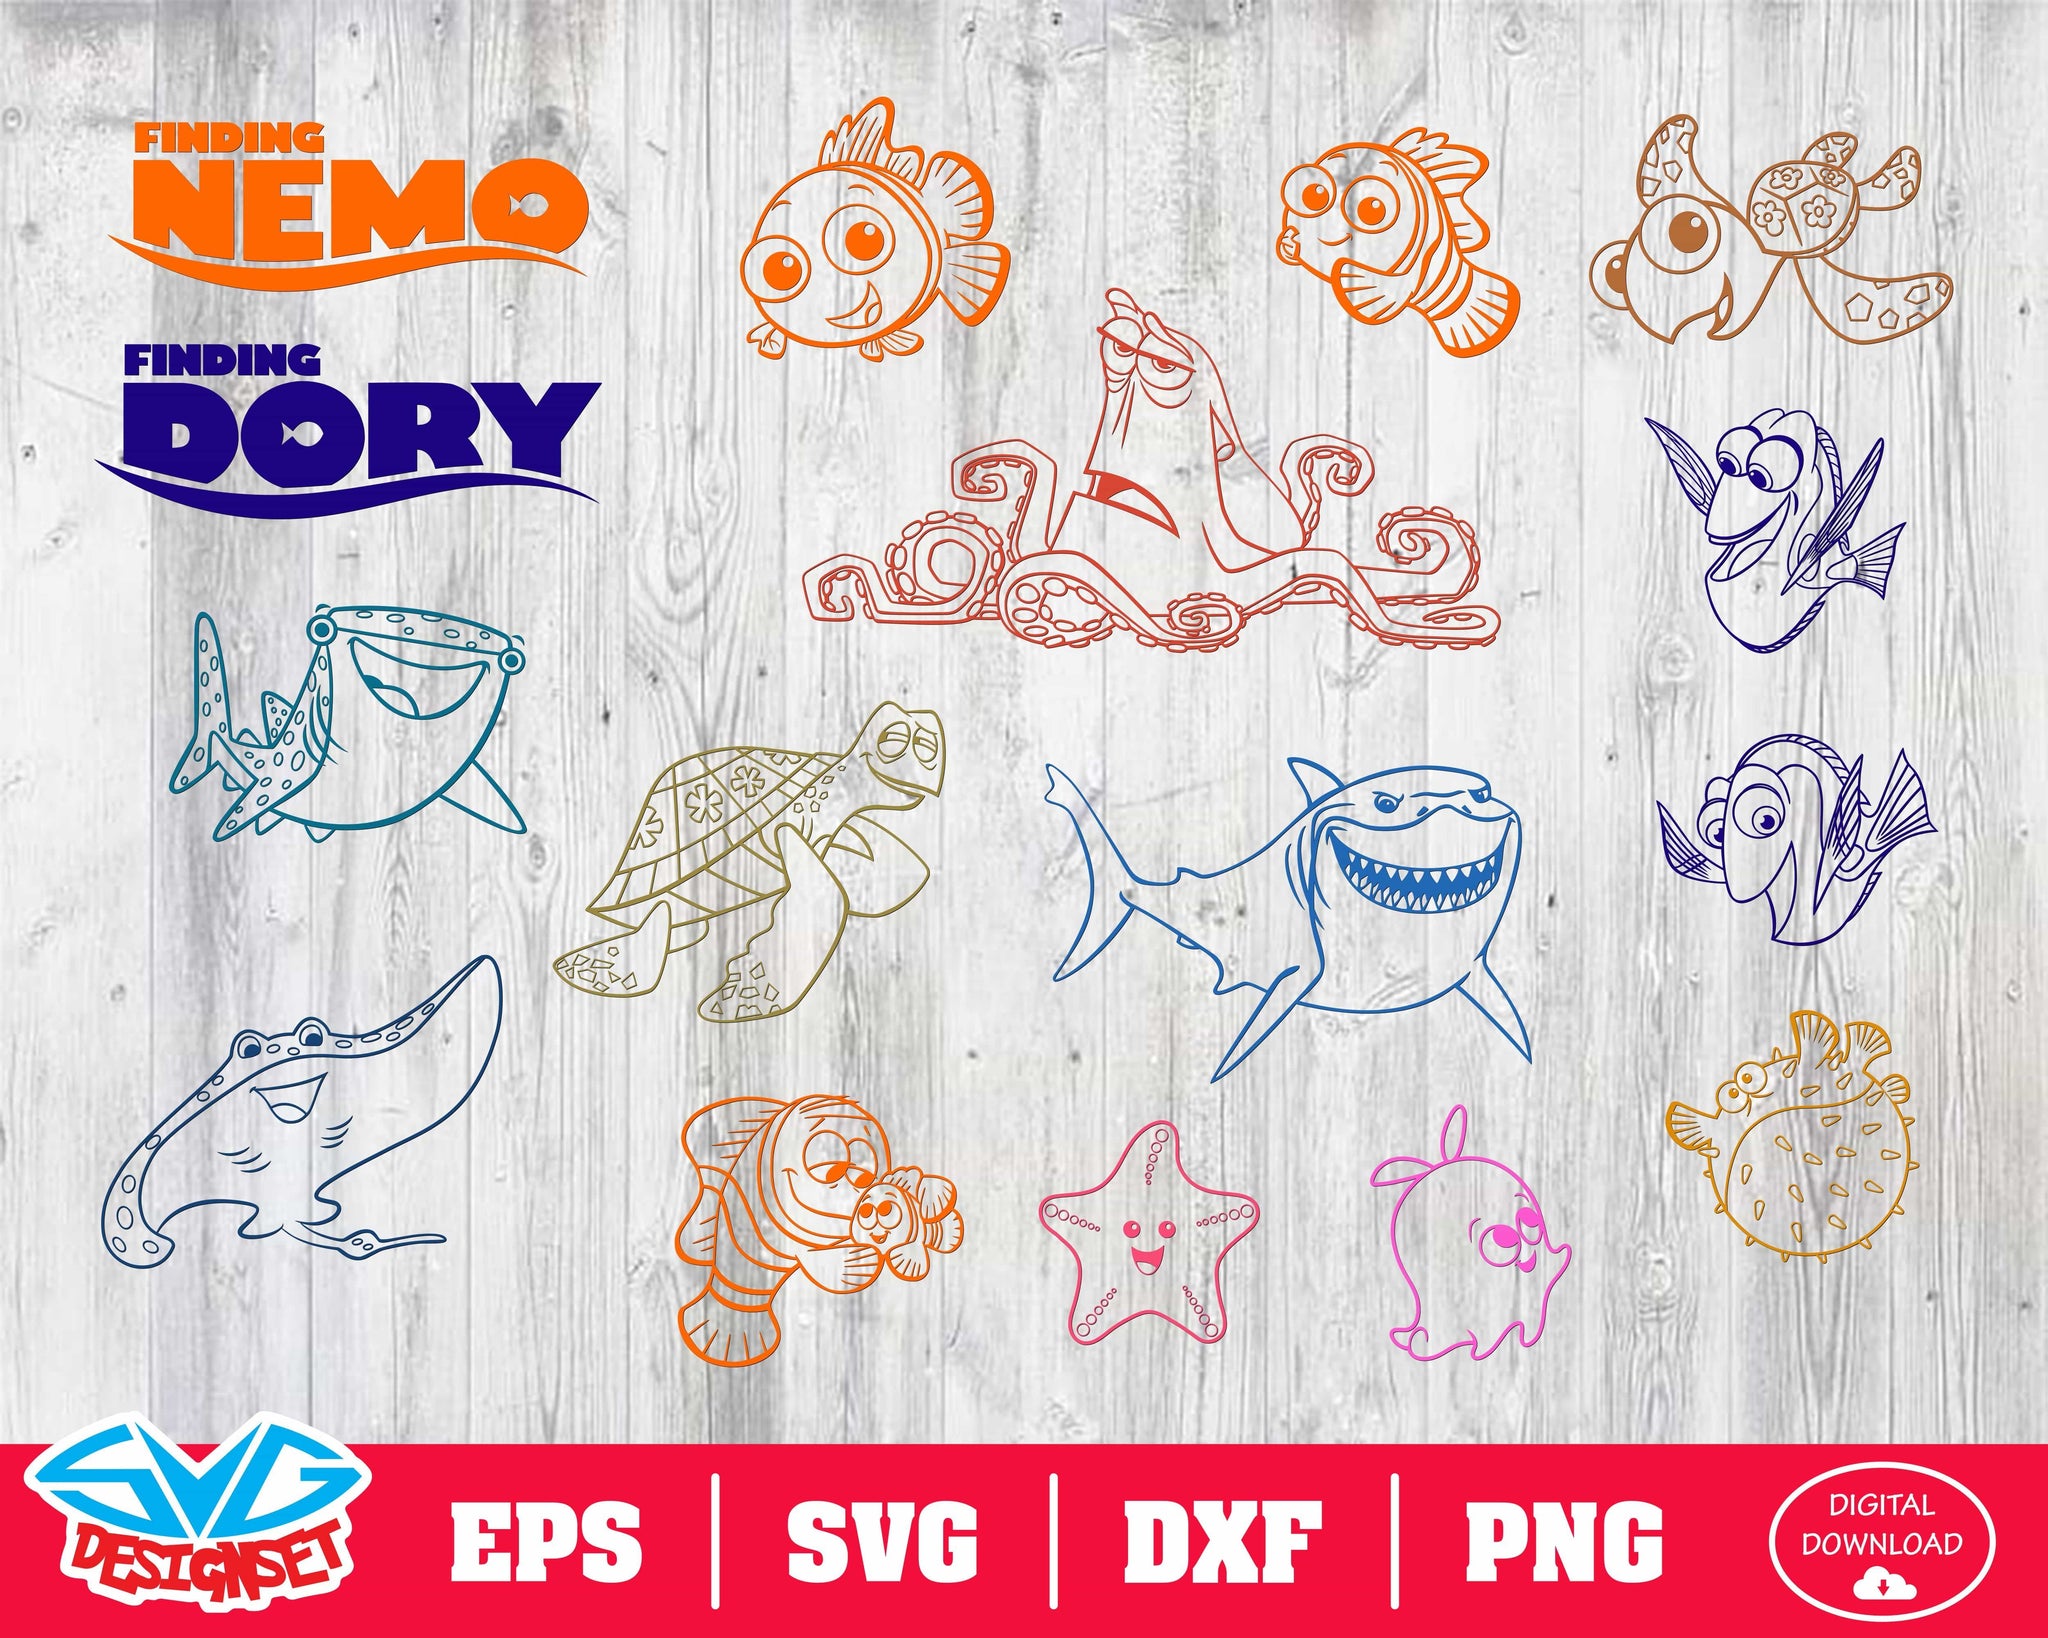 Nemo and Dory Svg, Dxf, Eps, Png, Clipart, Silhouette and Cutfiles #3 - SVGDesignSets